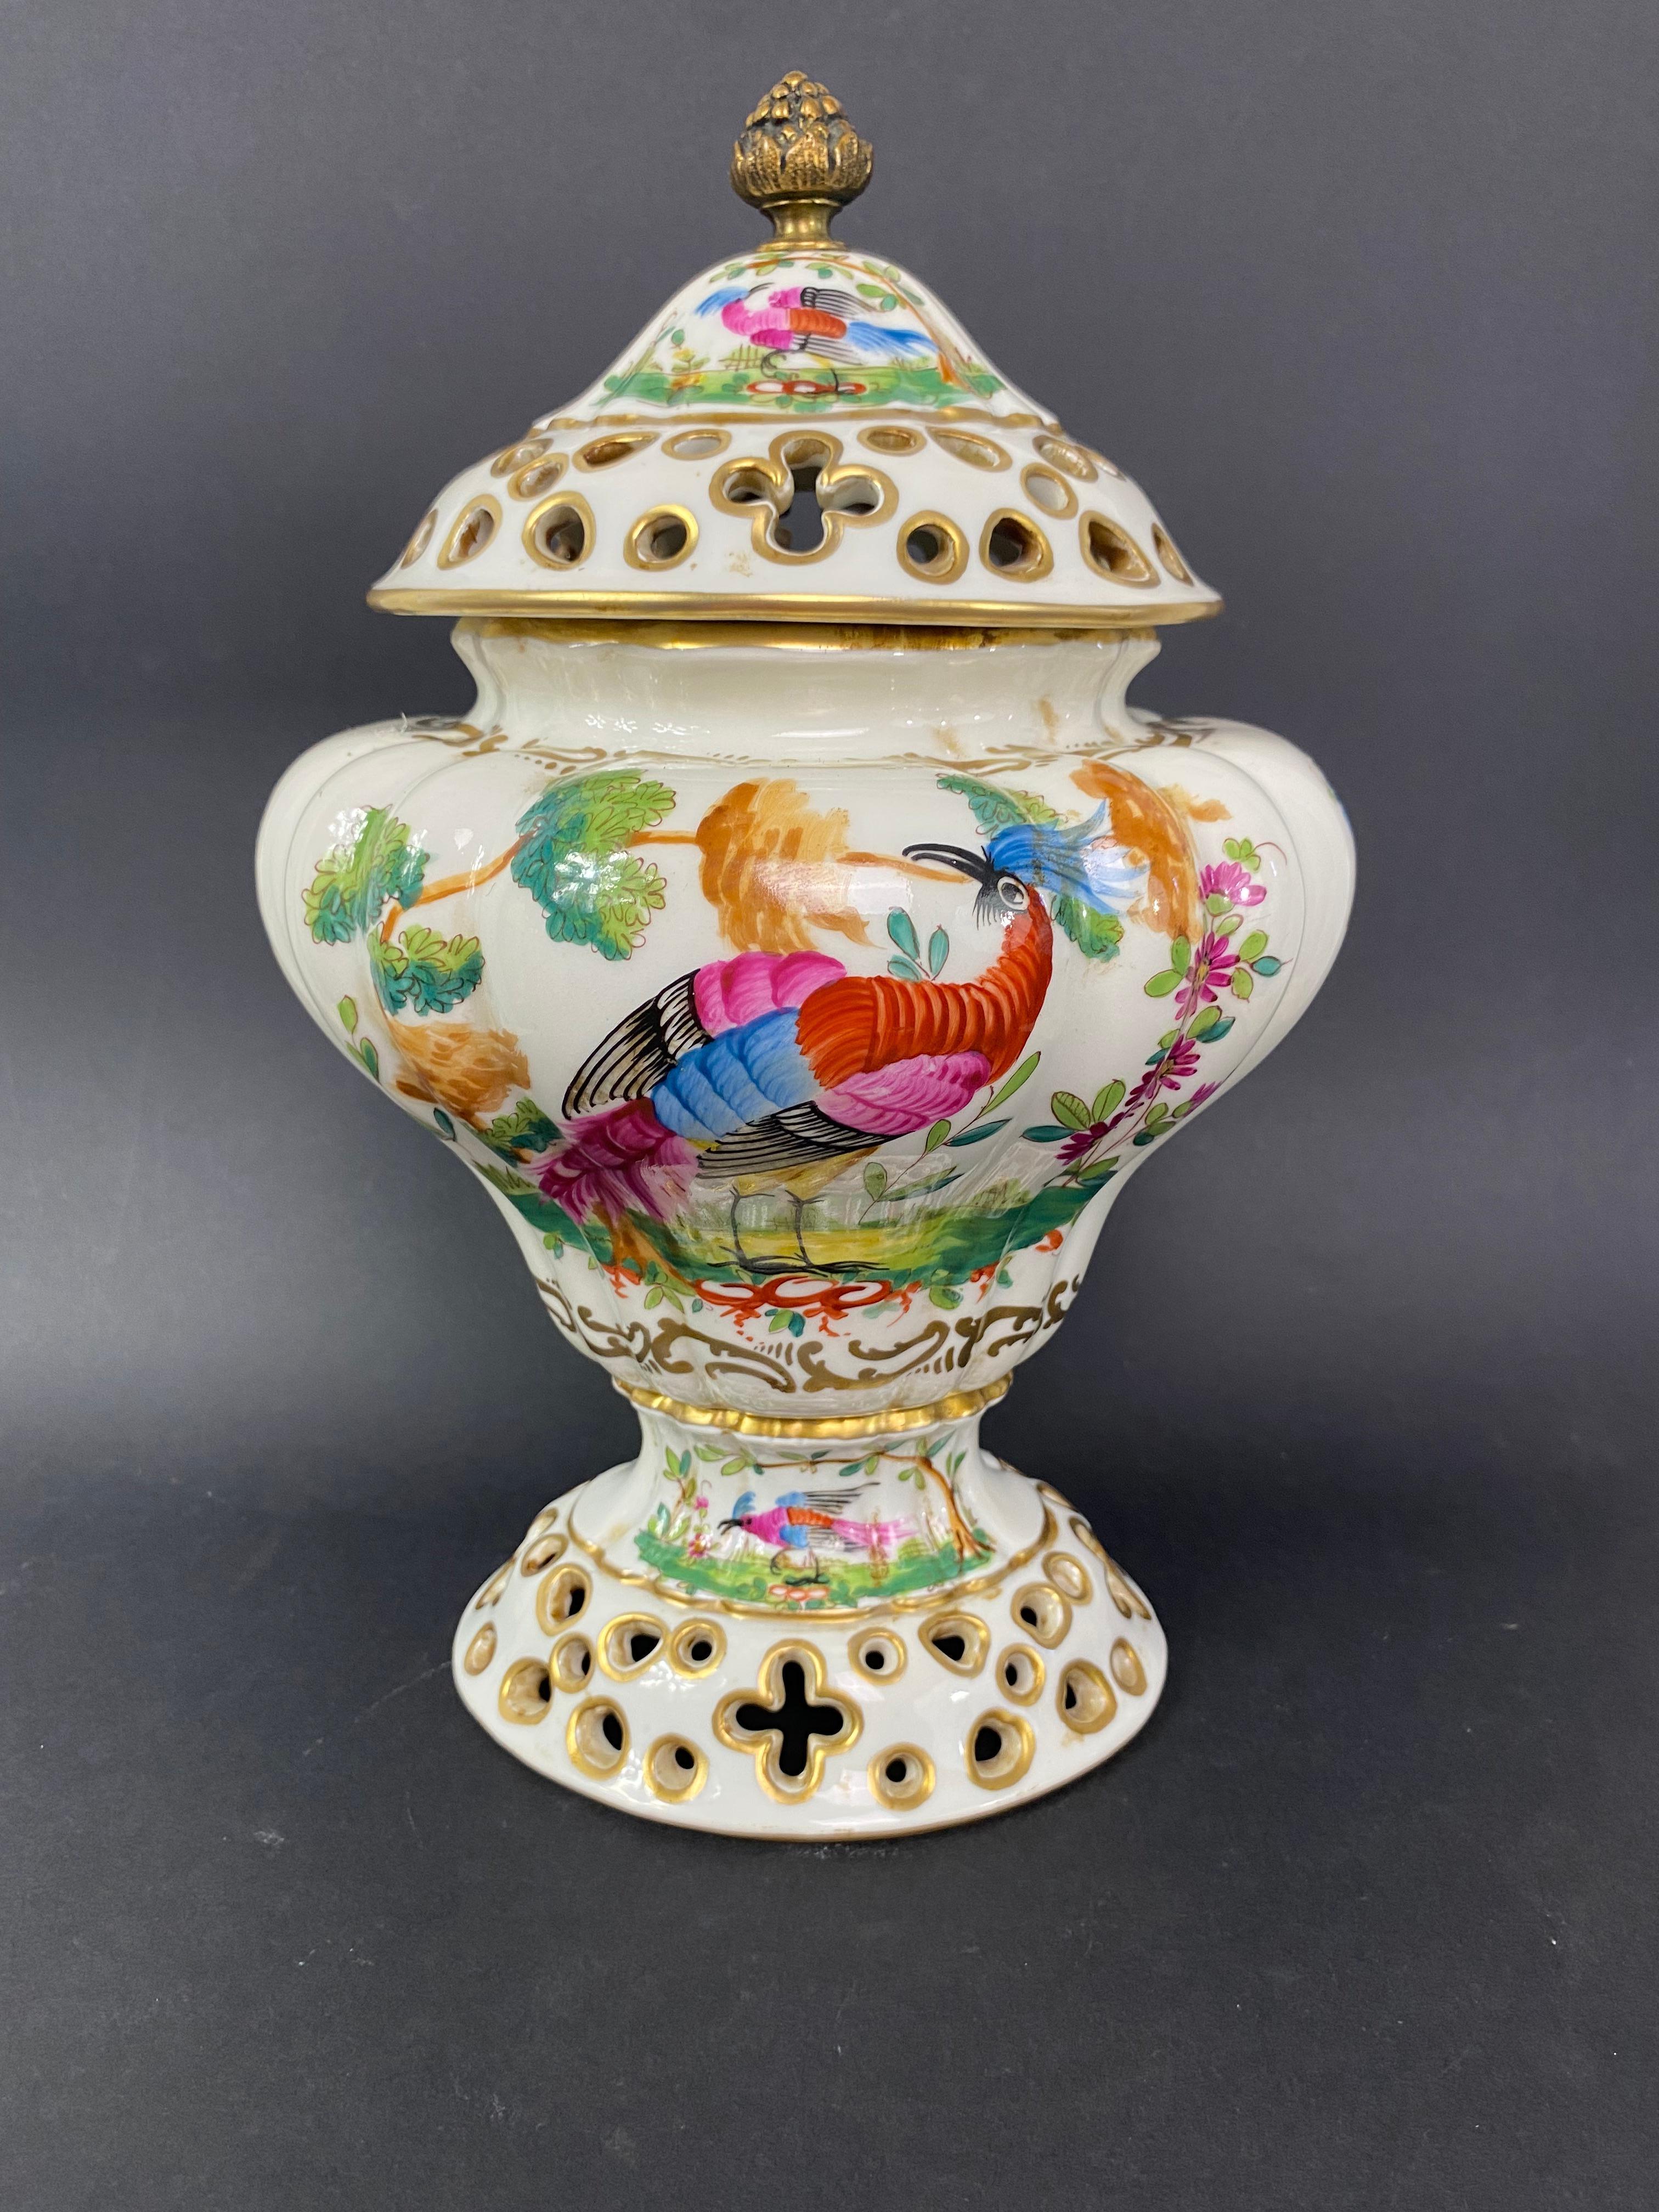 Very pretty pair of baluster shaped porcelain pot pourri vases with gadroons on pedestal,
decorated with birds, pheasants, in polychrome and gold landscapes. Wonderful, very colorful decor.
The lids and feet are perforated to let in the aromas of